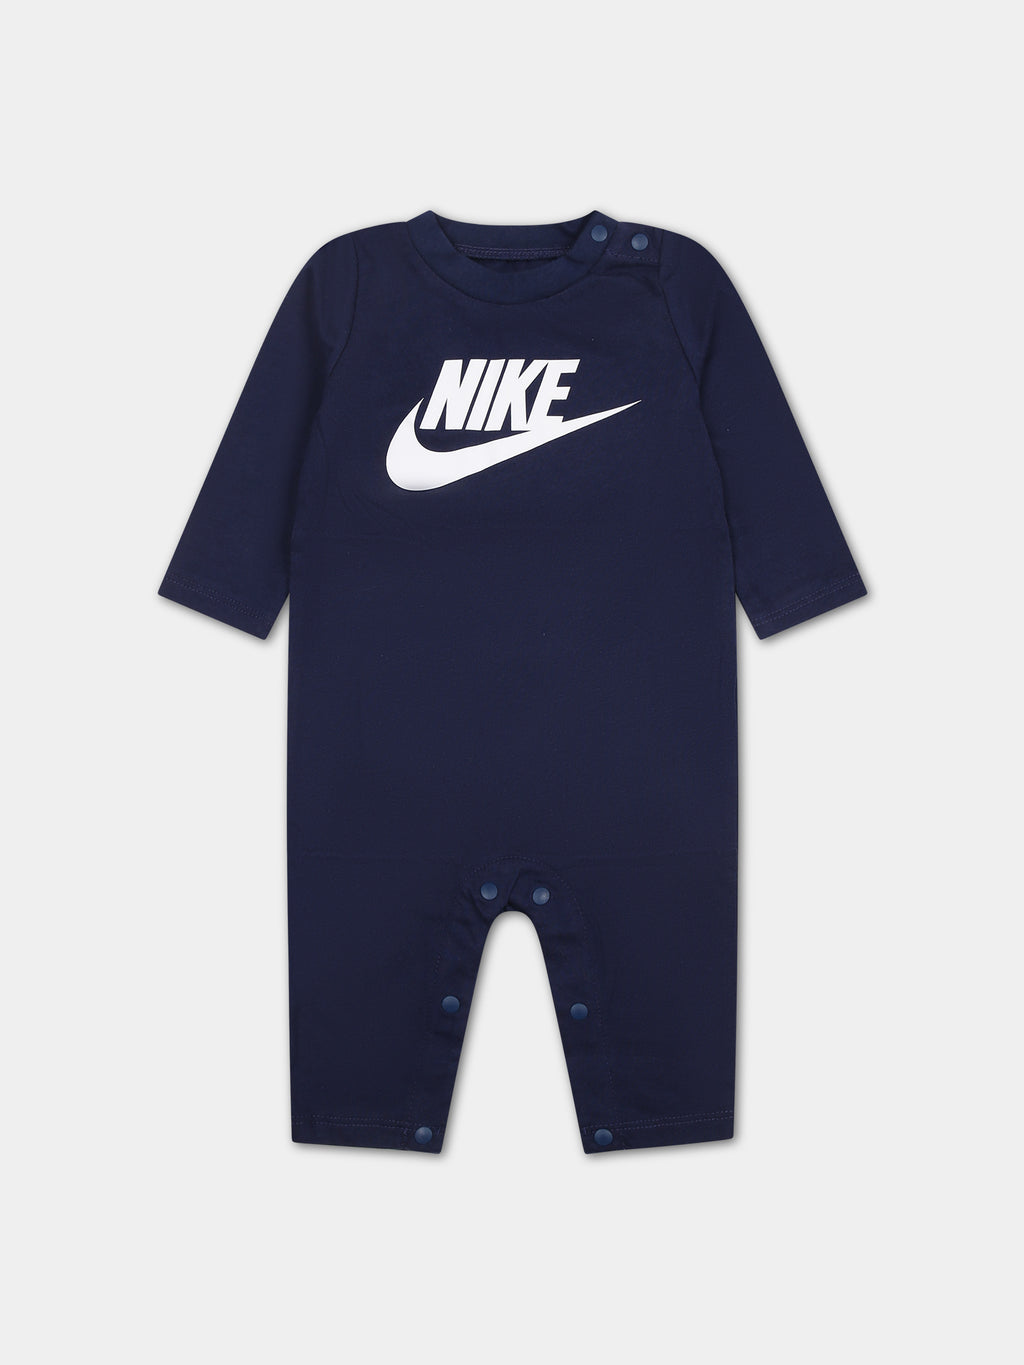 Blue babygrow for baby boy with swoosh